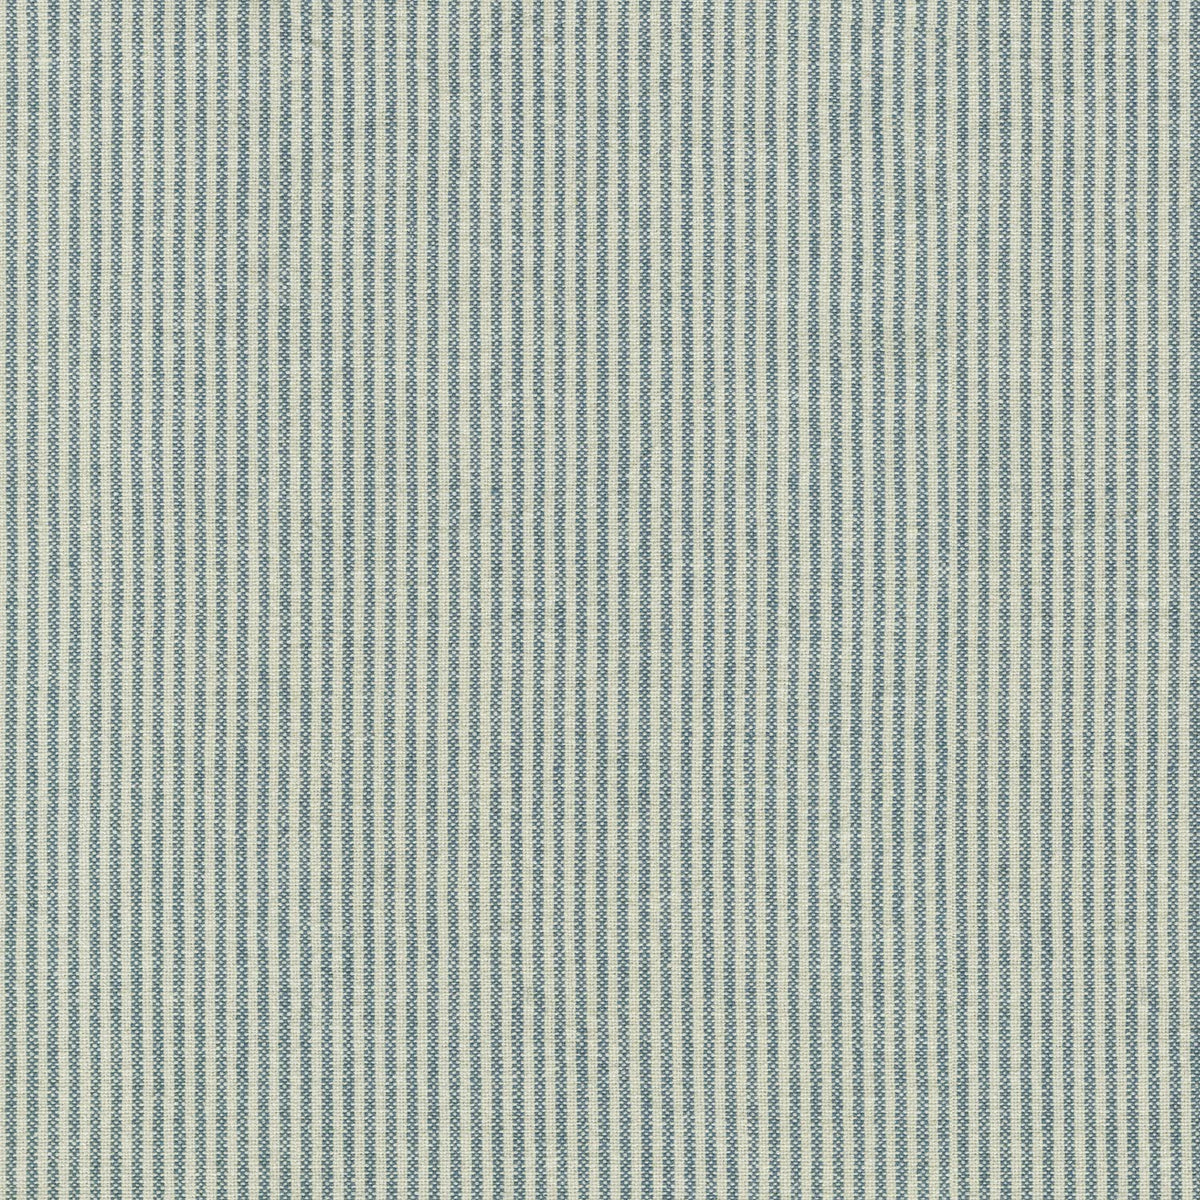 P/K Lifestyles Cullen Ticking - Lake 410710 Upholstery Fabric